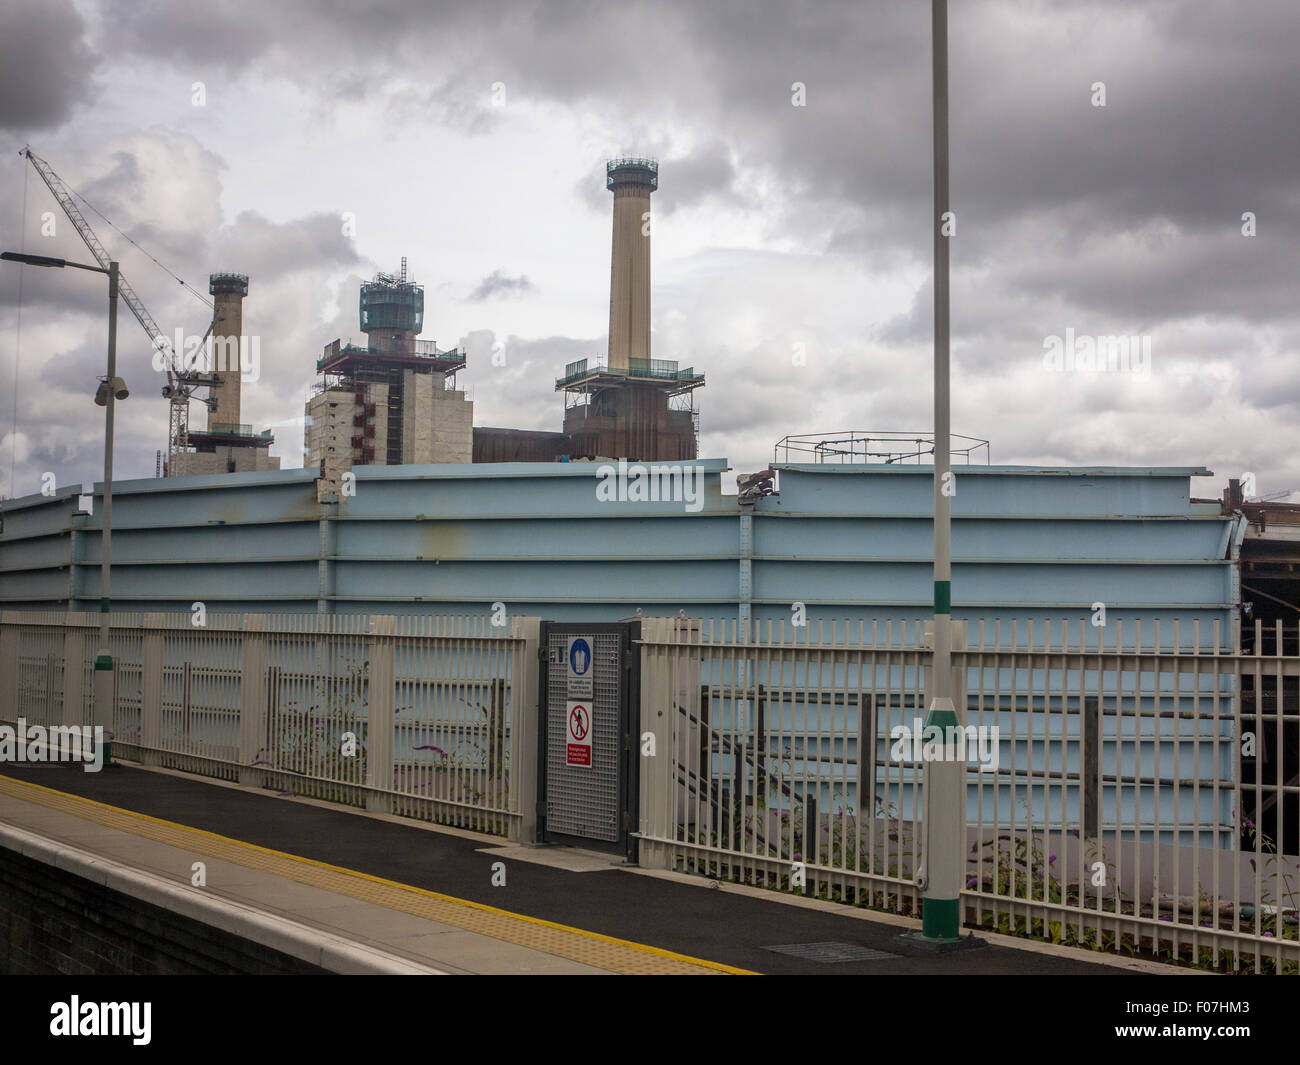 As a a part of the redevelopment of Battersea Power Station and the general area, the Battersea gas holders are being removed Stock Photo